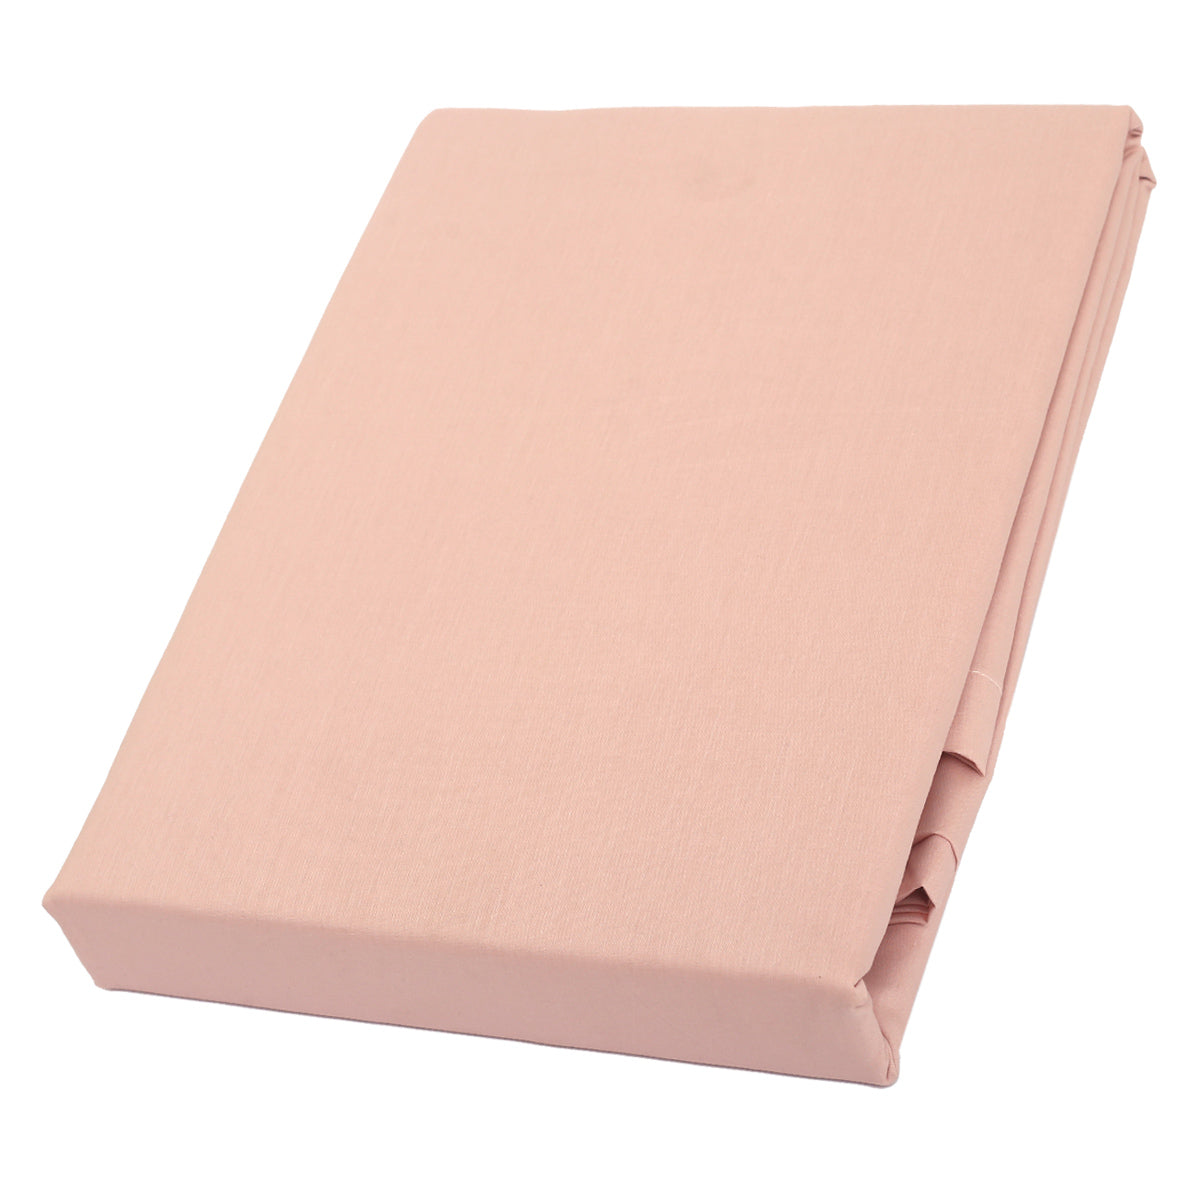 Powder Pink Double Bed Sheet 96x102"